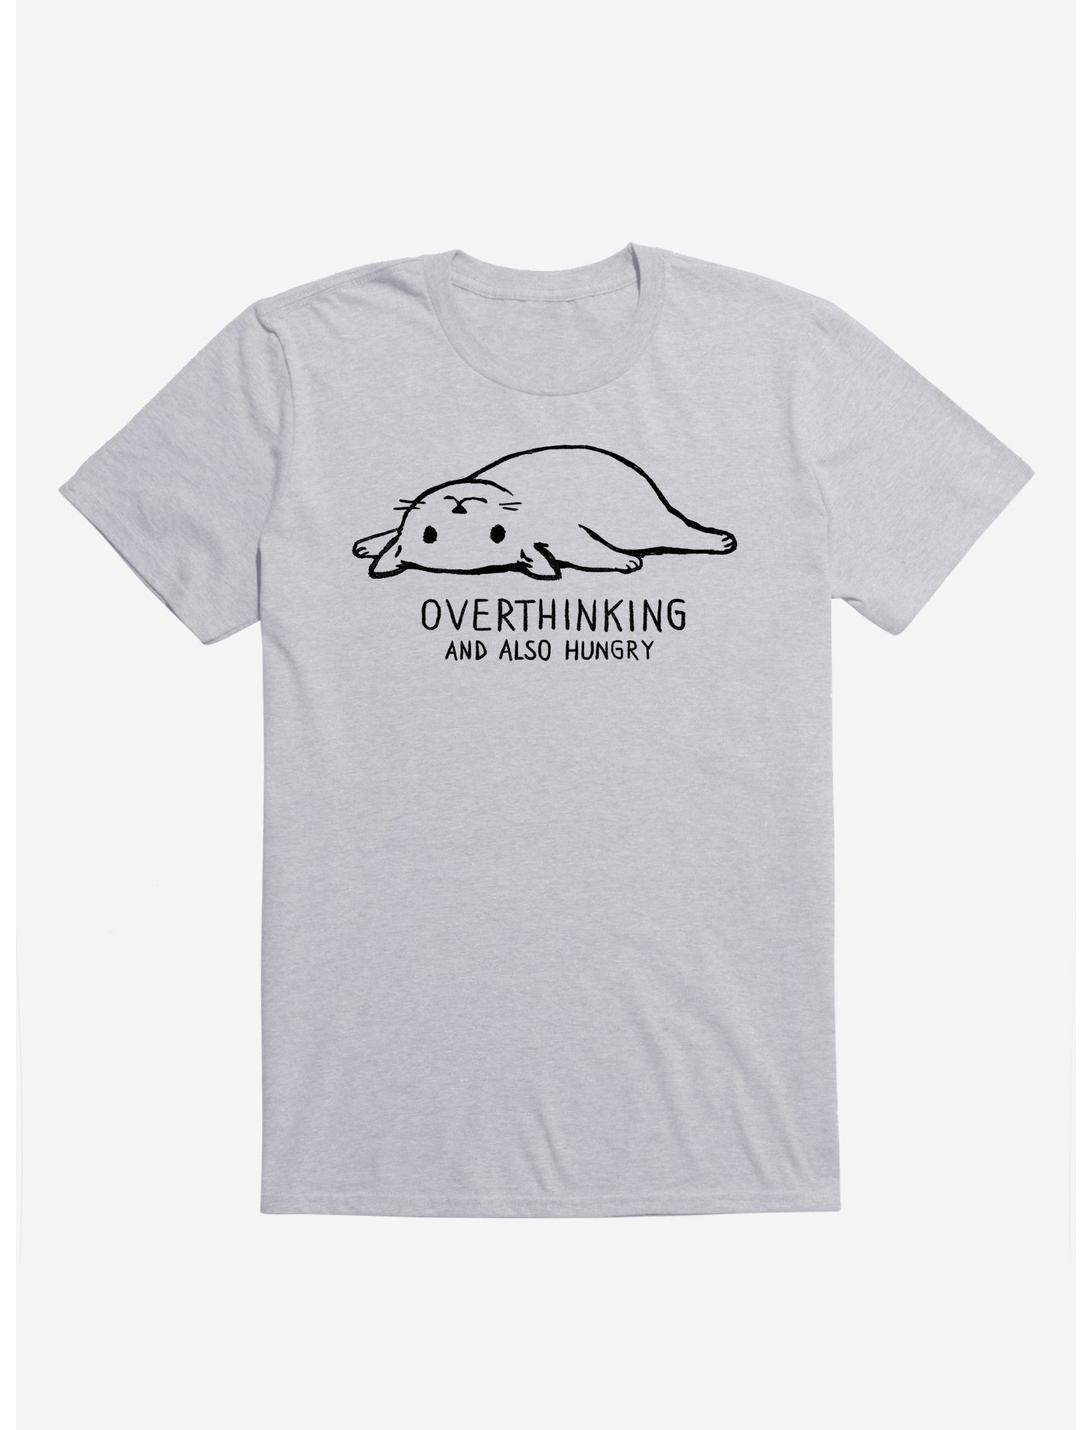 Overthinking And Also Hungry Cat T-Shirt, SPORT GRAY, hi-res